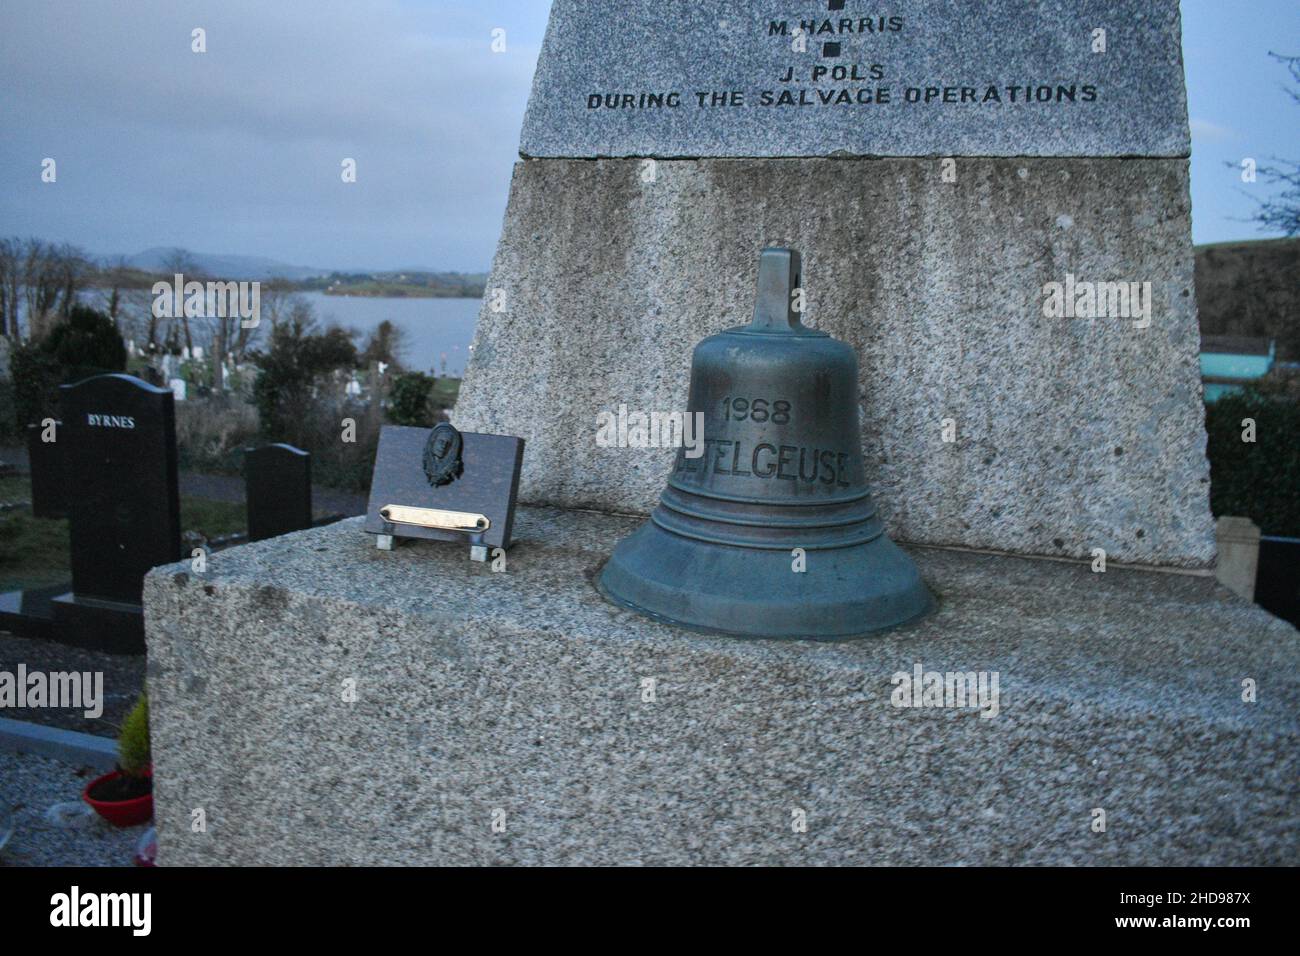 Bantry, West Cork, Ireland. 4th Jan, 2022. The 43rd anniversary of the Whiddy Island disaster, in which 51 people died at the sea of Bantry Bay, will be commemorated on January 8, 2022. Cedit: Karlis Dzjamko/Alamy Live News. Stock Photo